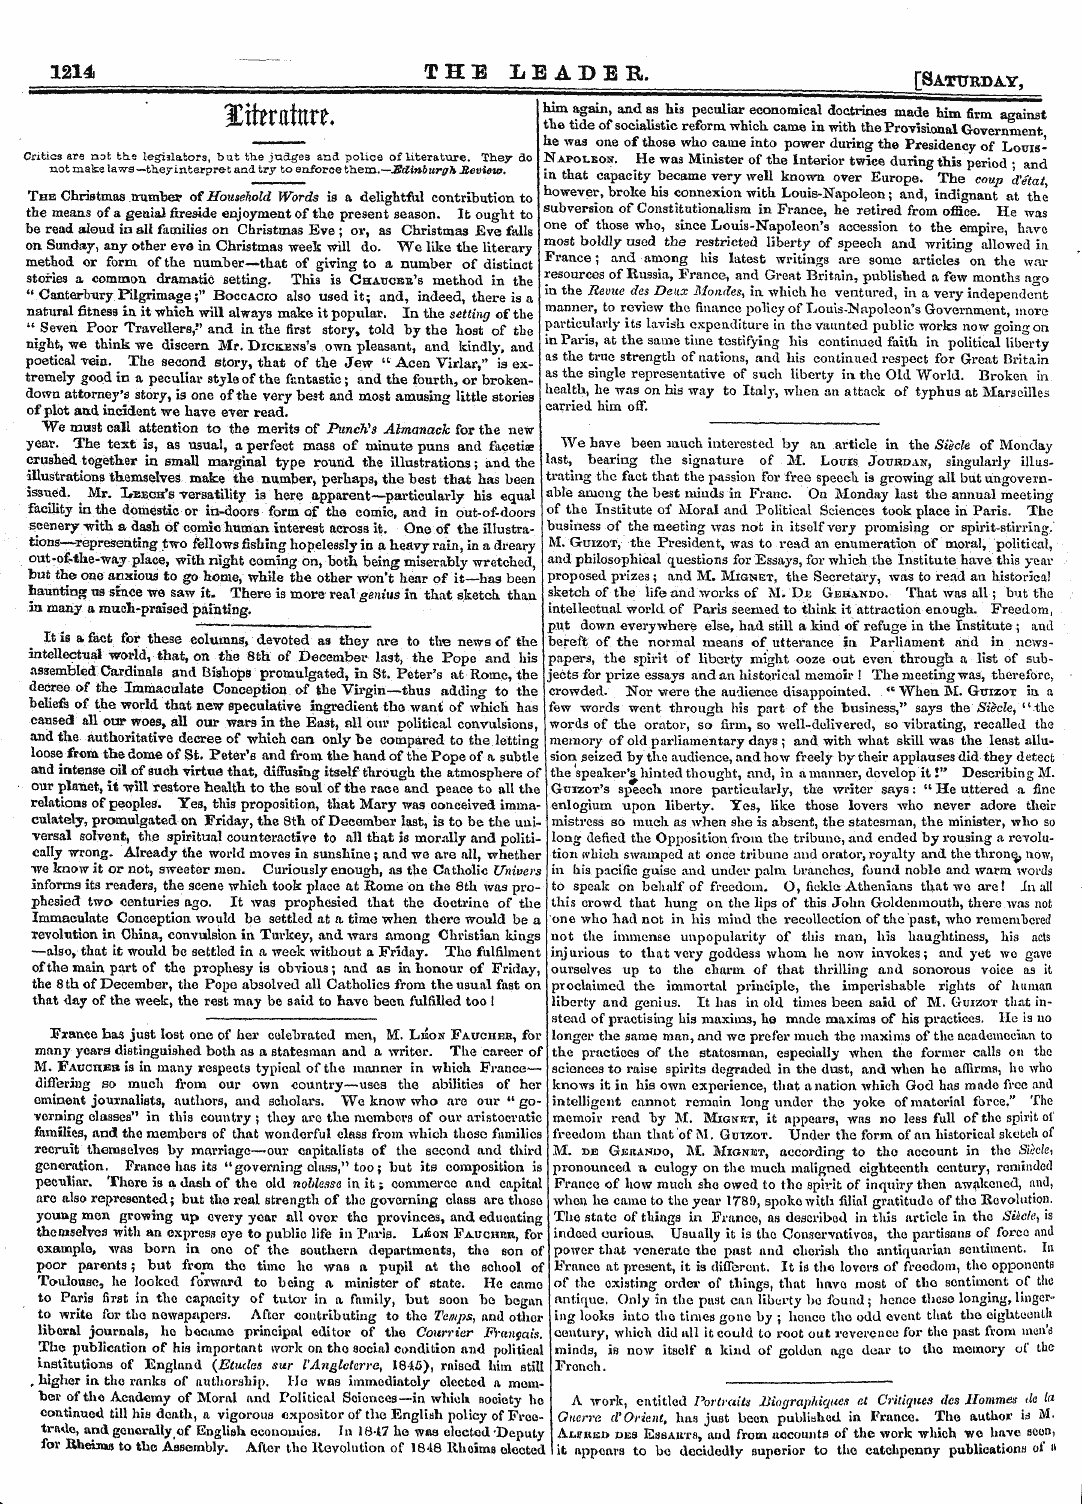 Leader (1850-1860): jS F Y, 2nd edition: 14